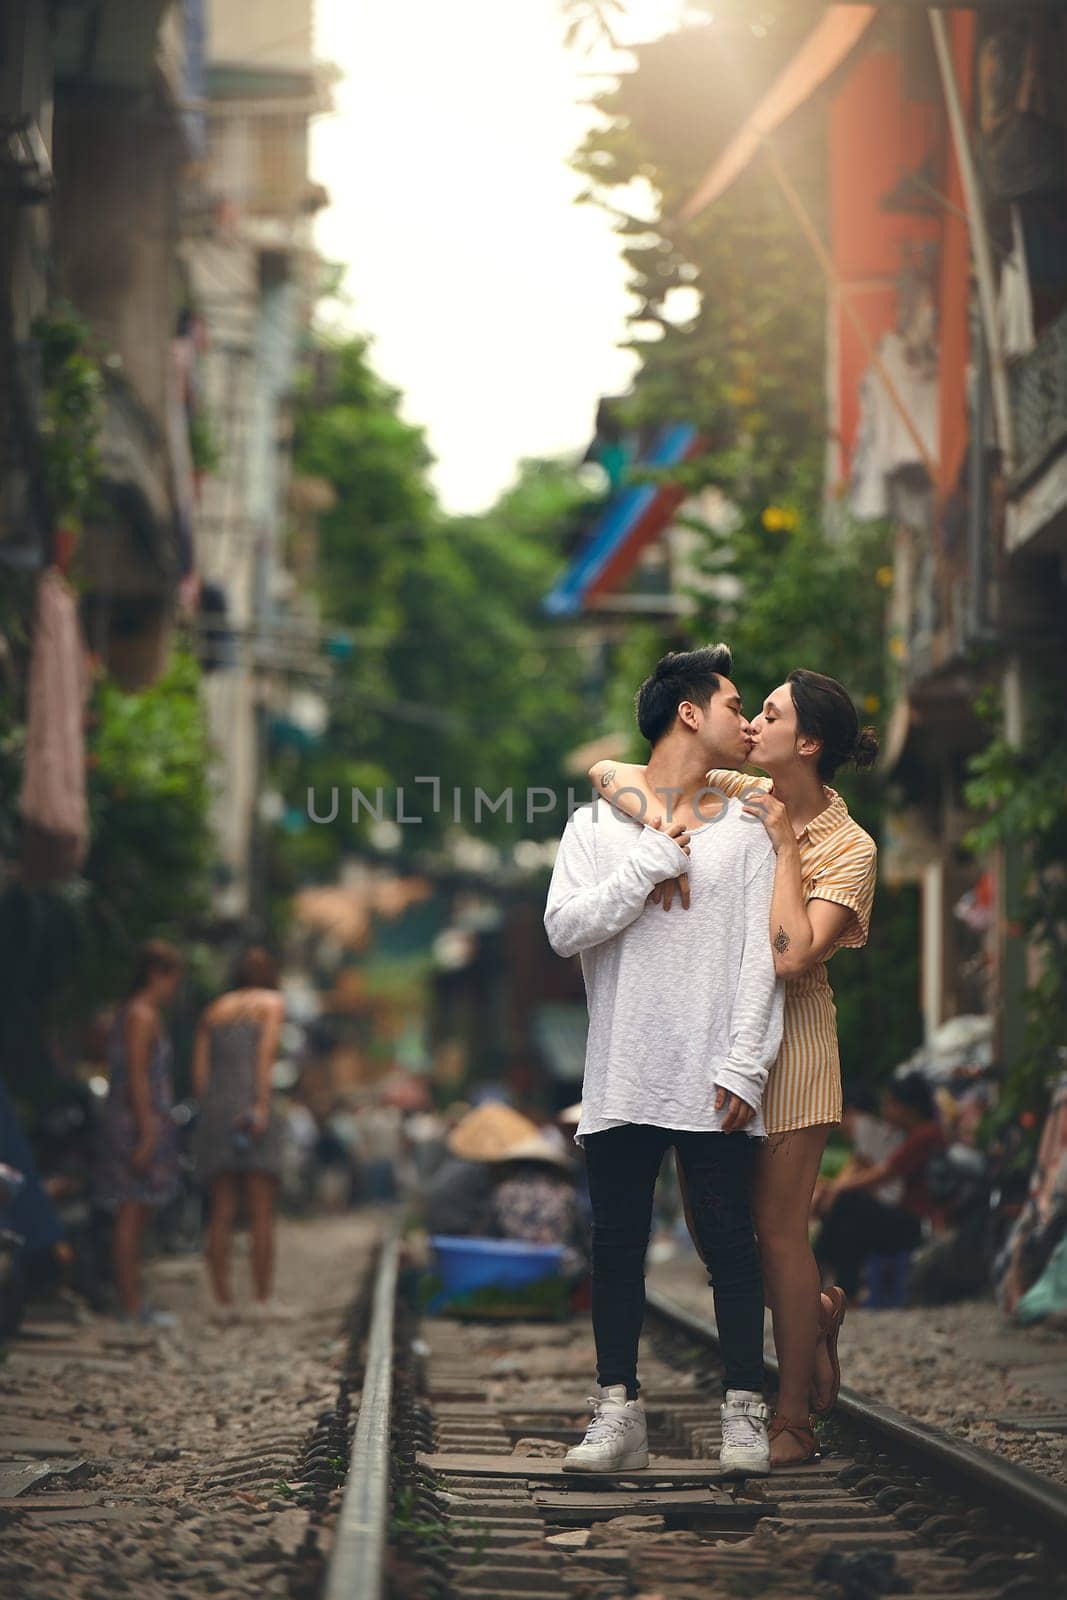 The kind of romance we dream about. a young couple sharing a romantic moment on the train tracks in the streets of Vietnam